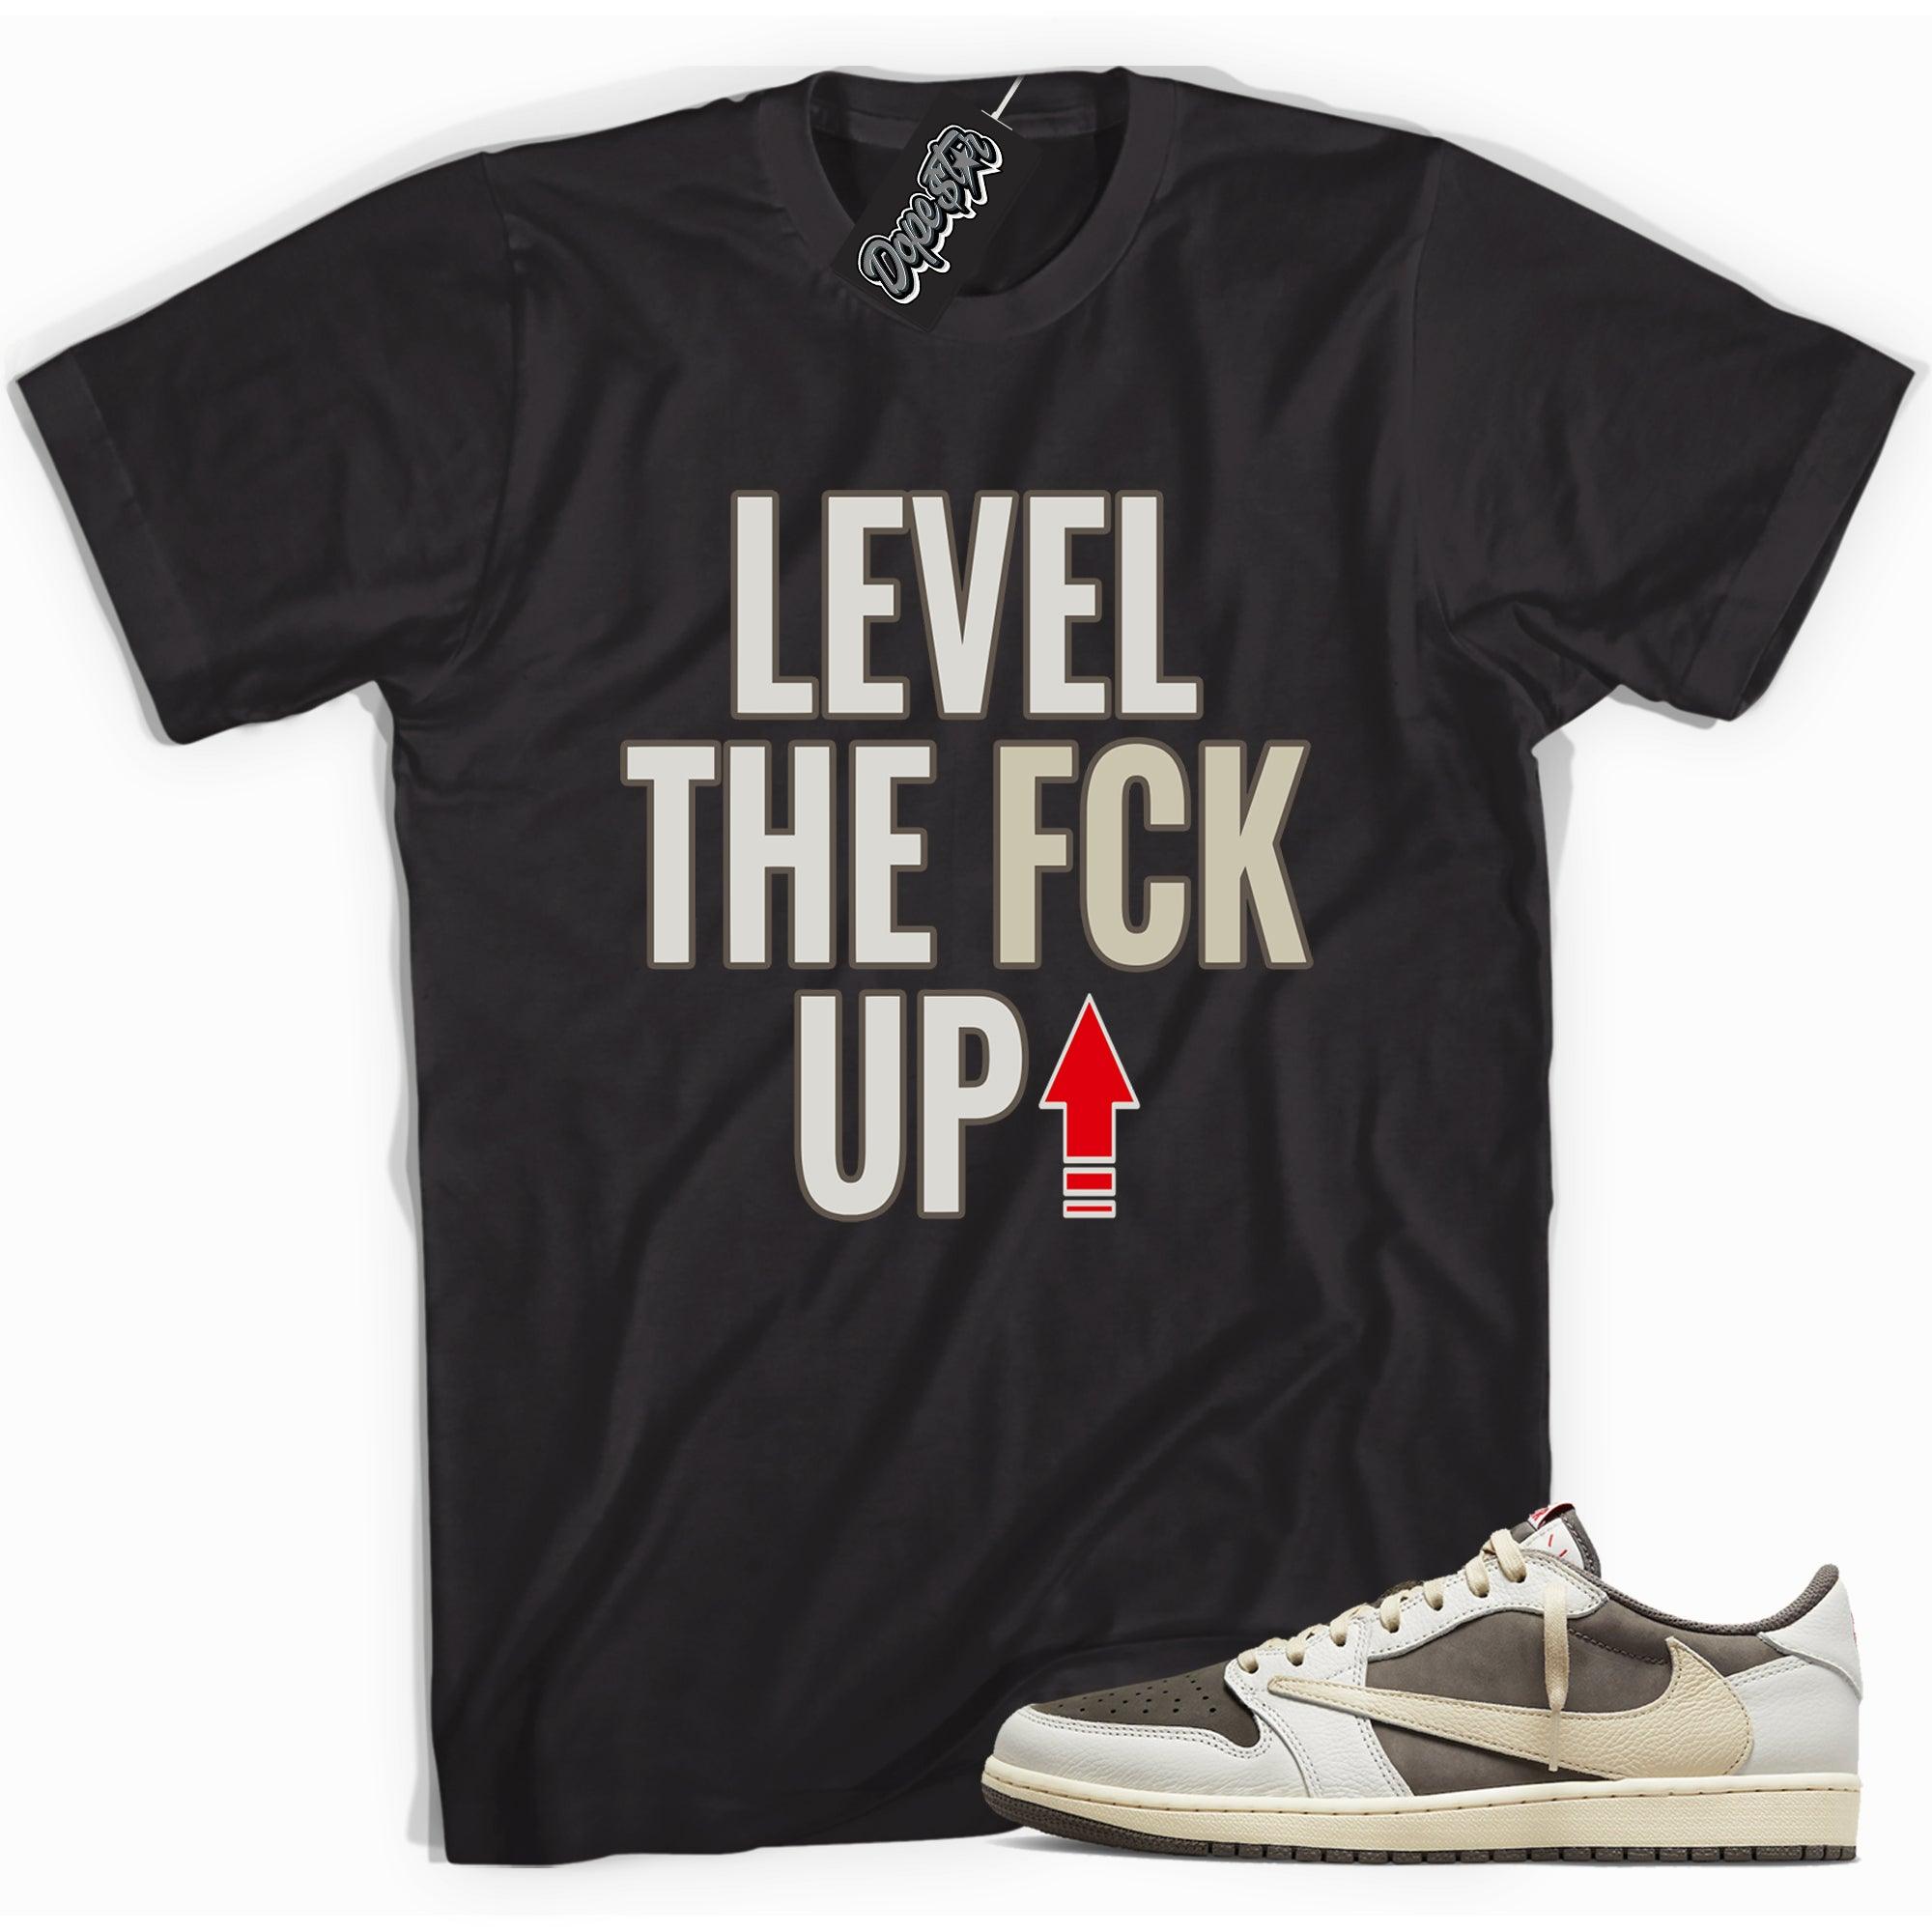 Cool black graphic tee with 'Level Up' print, that perfectly matches Travis Scott's Air Jordan 1 Low 'Reverse Mocha sneakers.